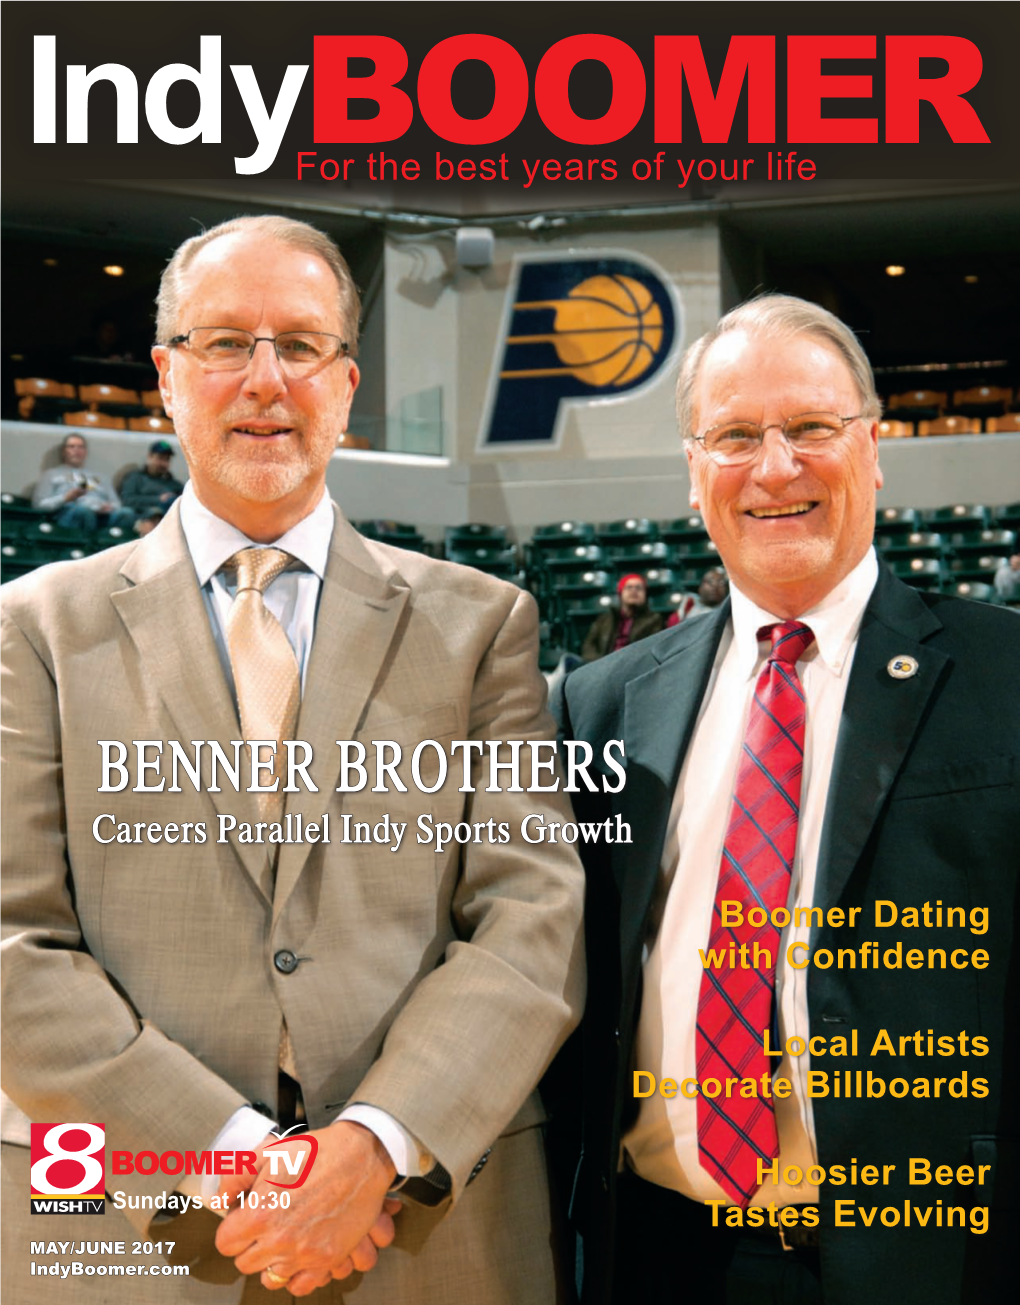 BENNER BROTHERS Careers Parallel Indy Sports Growth